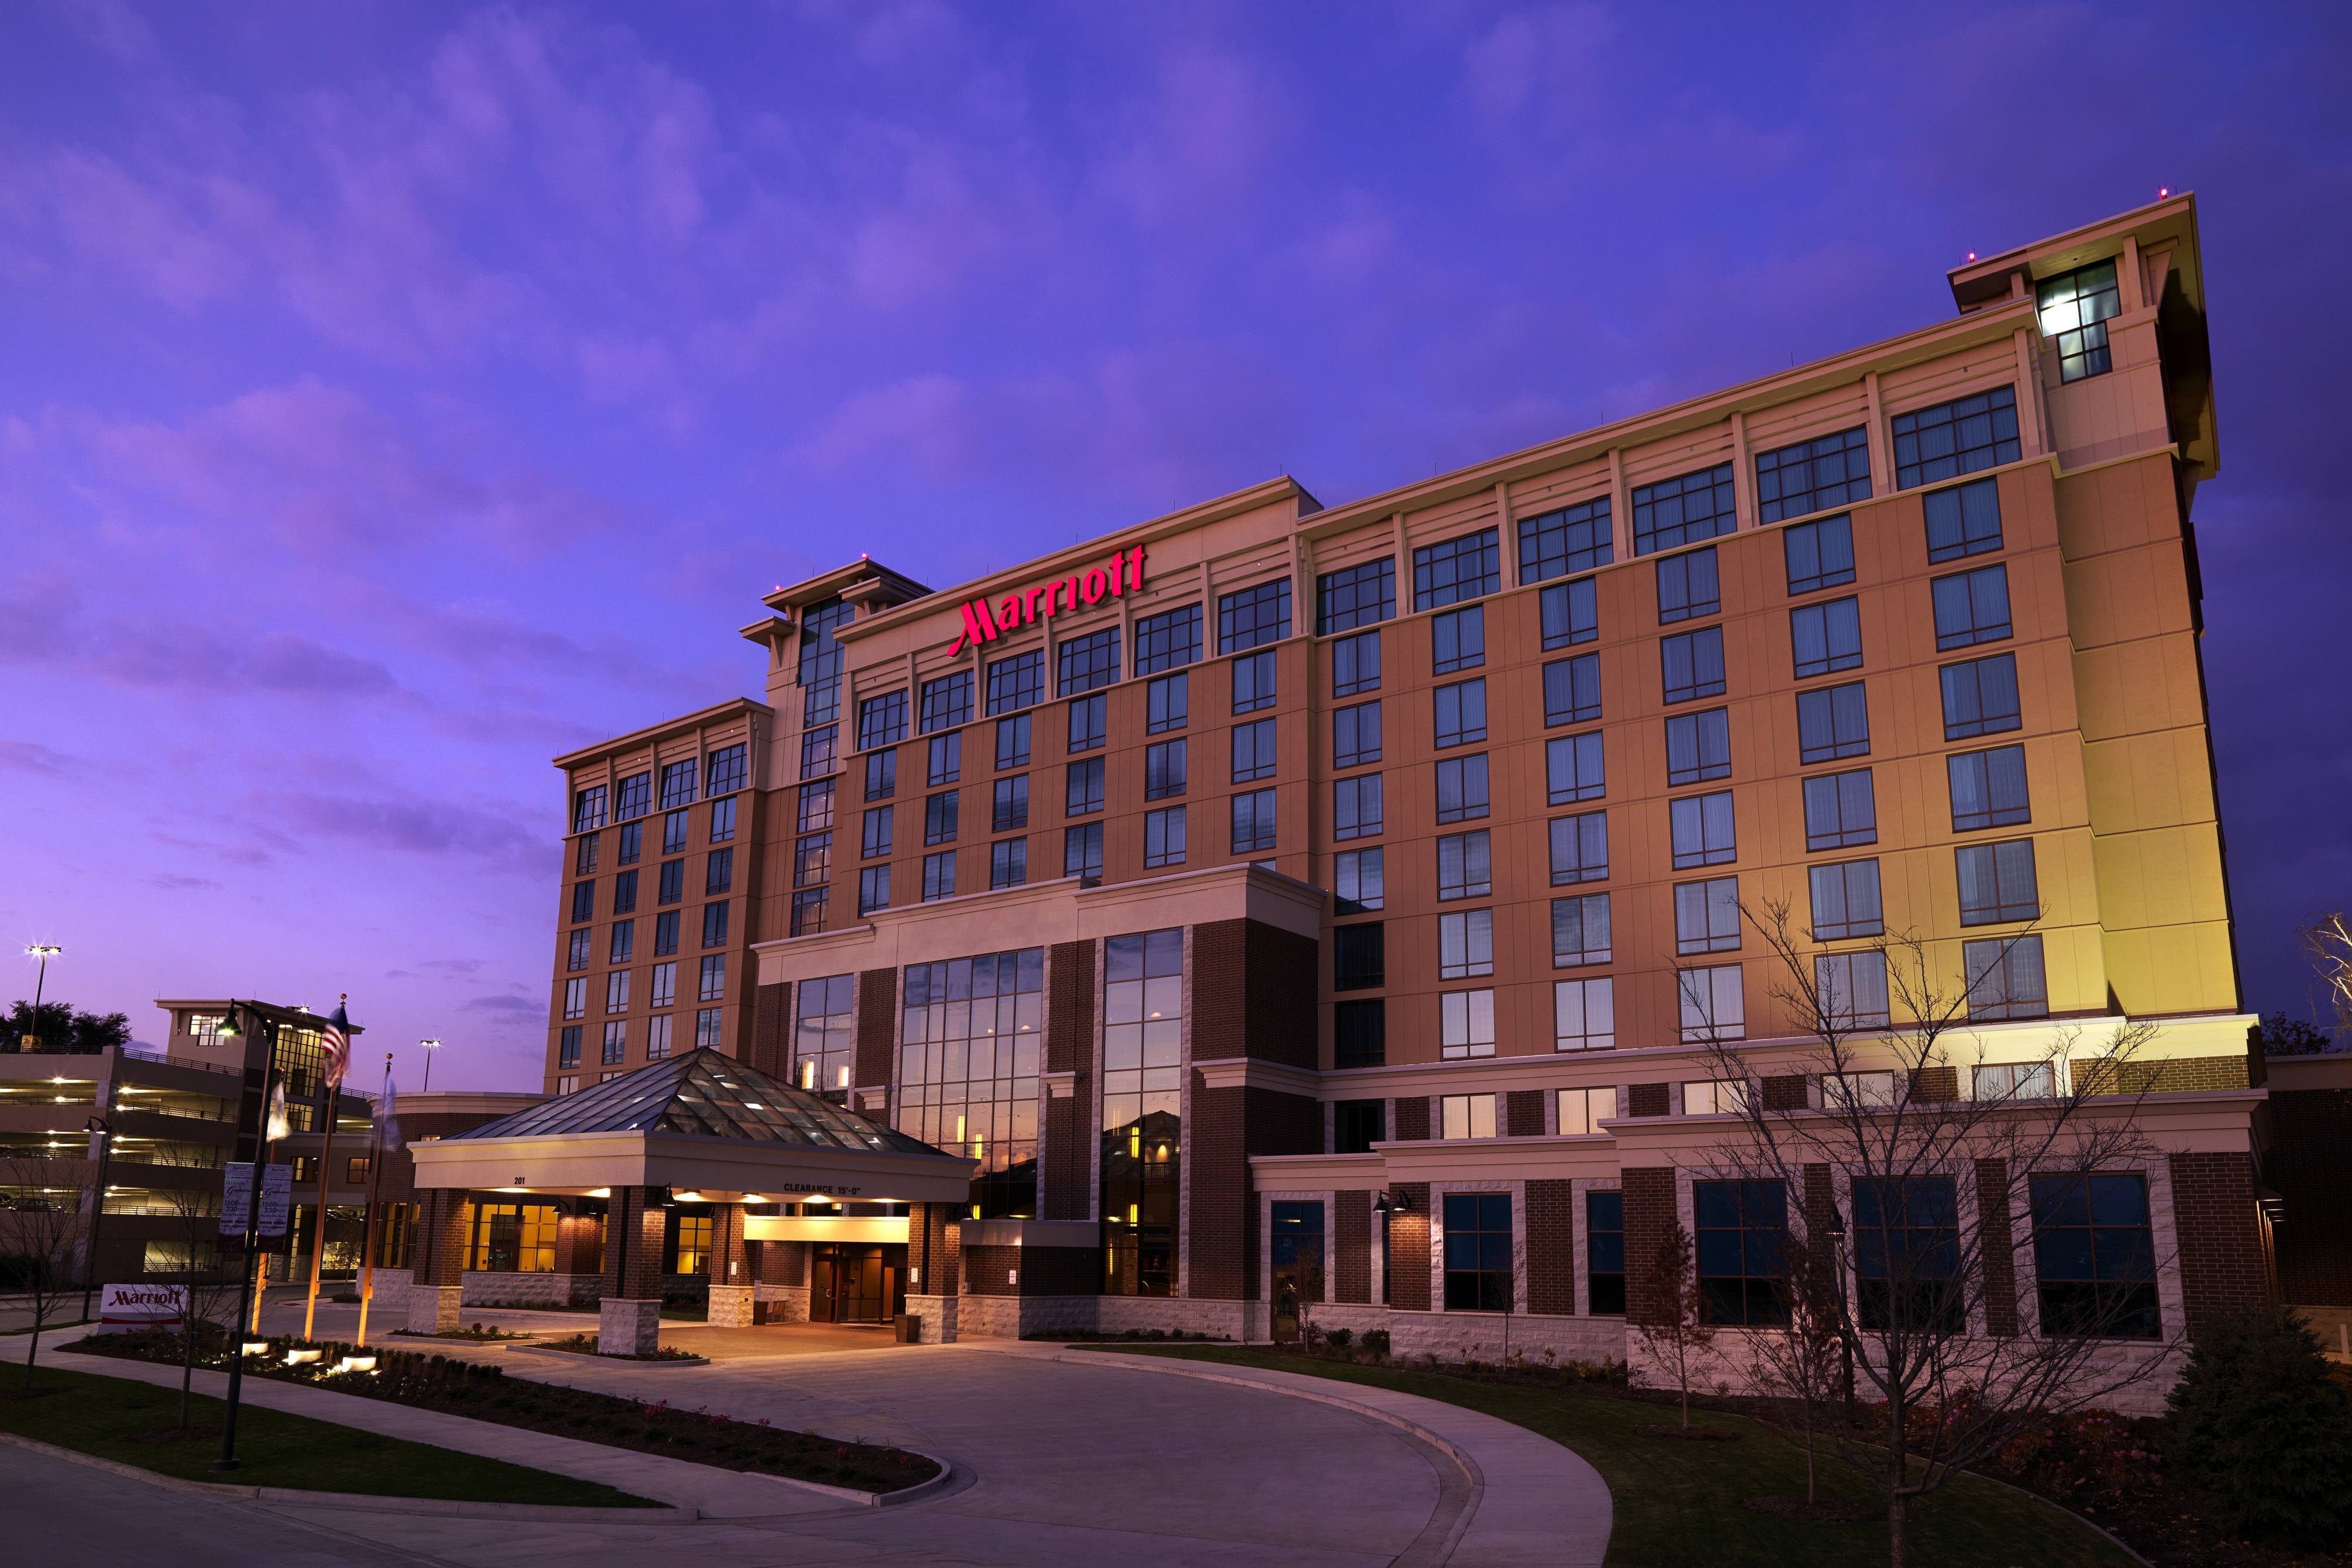 Photo of Bloomington-Normal Marriott Hotel & Conference Center, Normal, IL